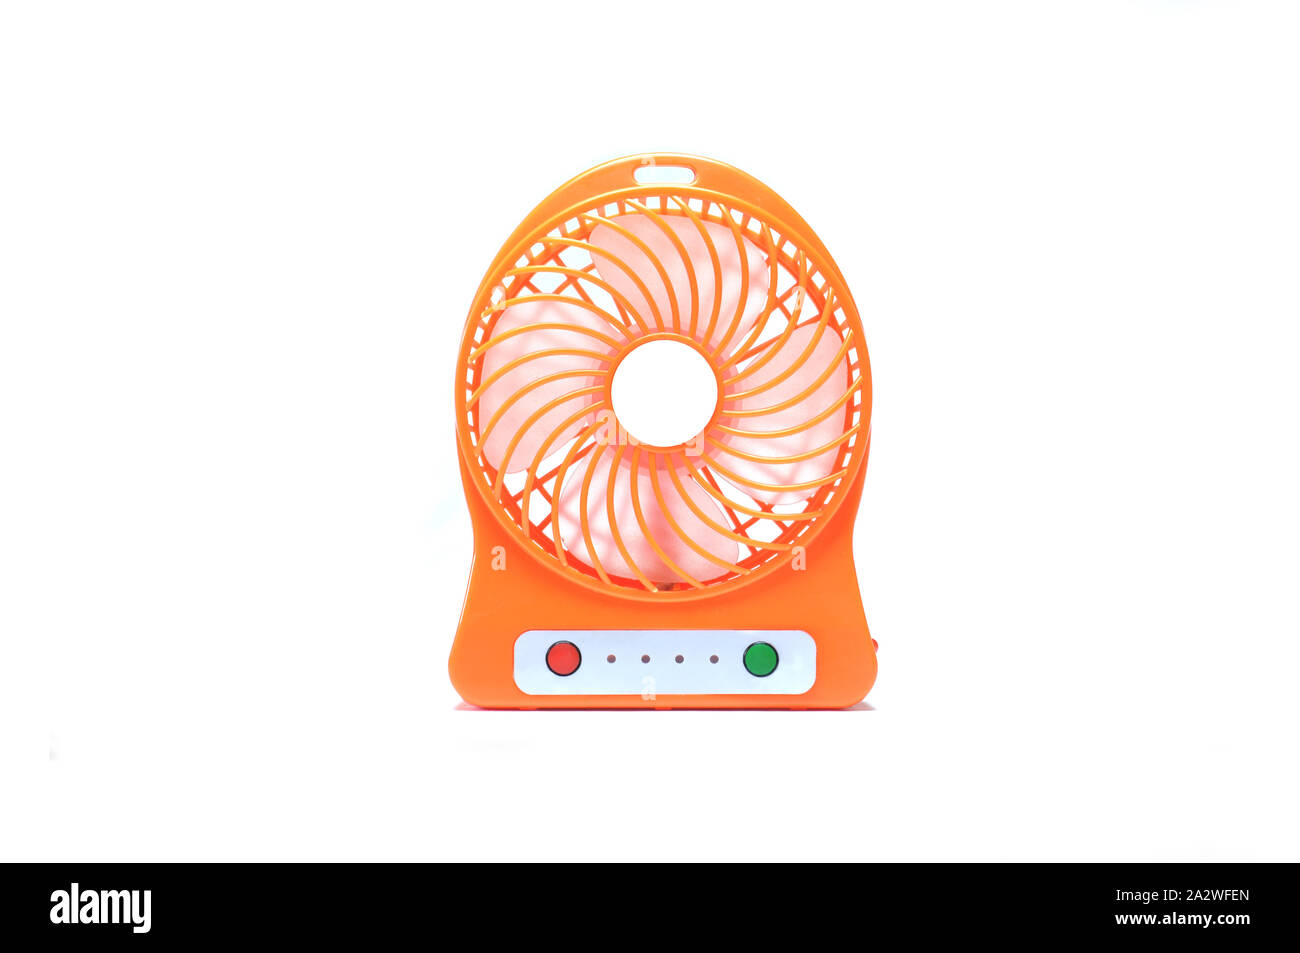 Orange, portable, USB, battery powered, rechargeable, small, mini electric fan, cheap and affordable tech trend in Asia. Stock Photo